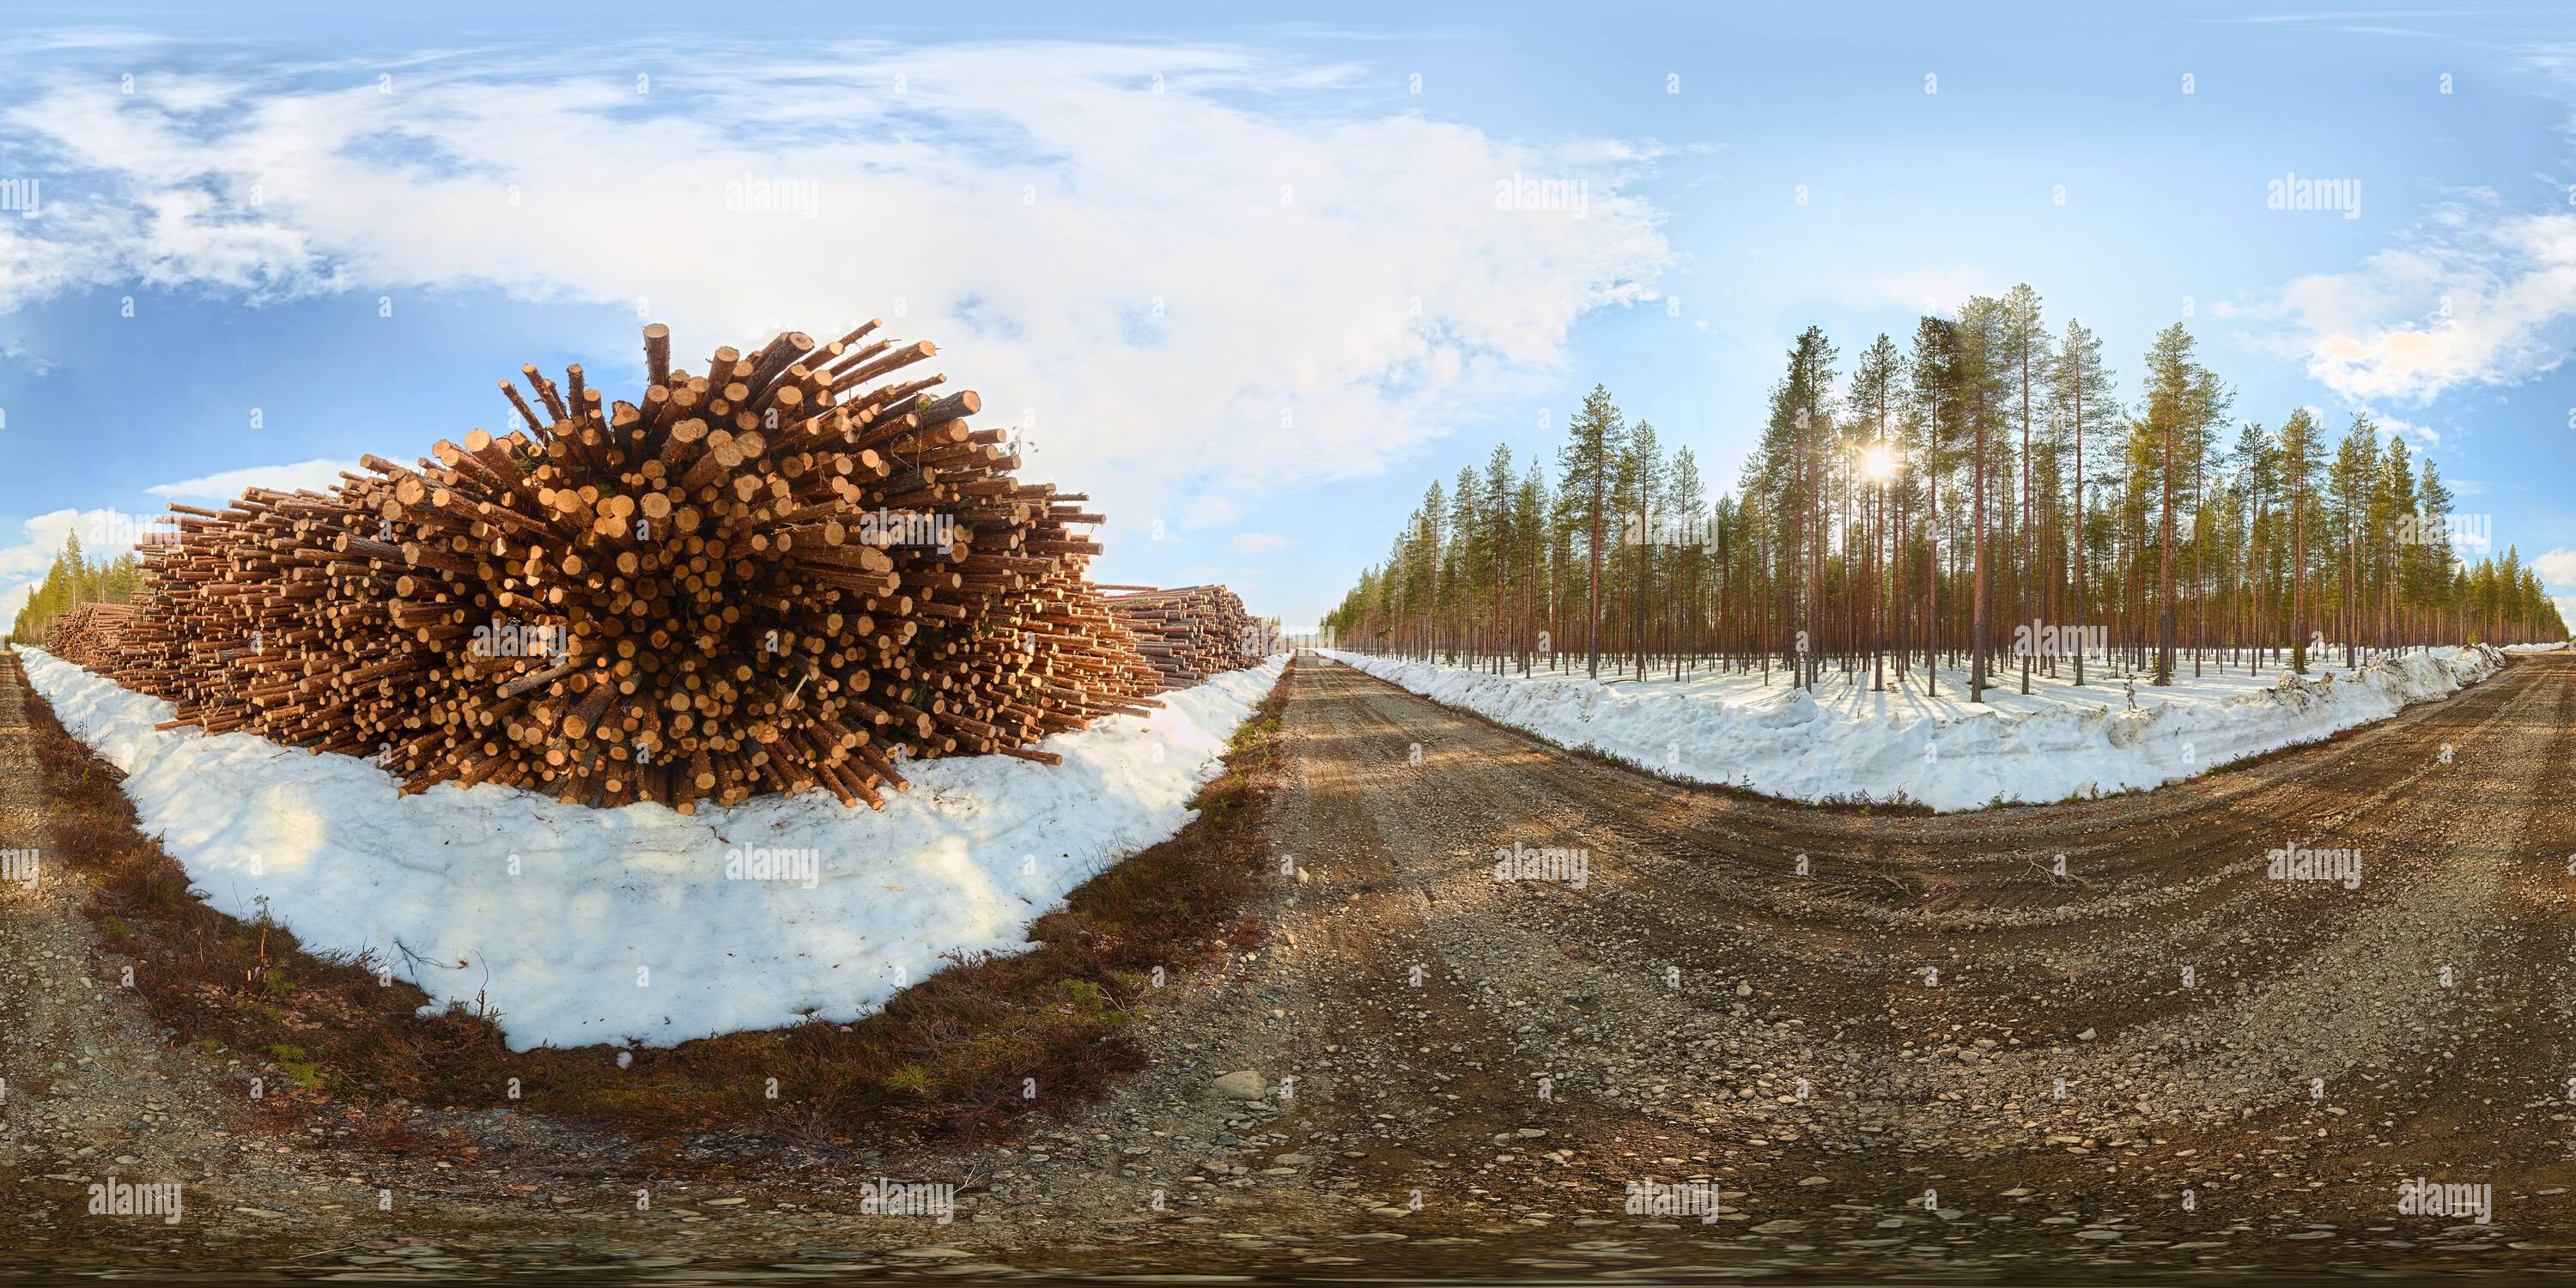 360 degree panoramic view of Spherical panorama of forestry area with stacks of wood and pine forest.